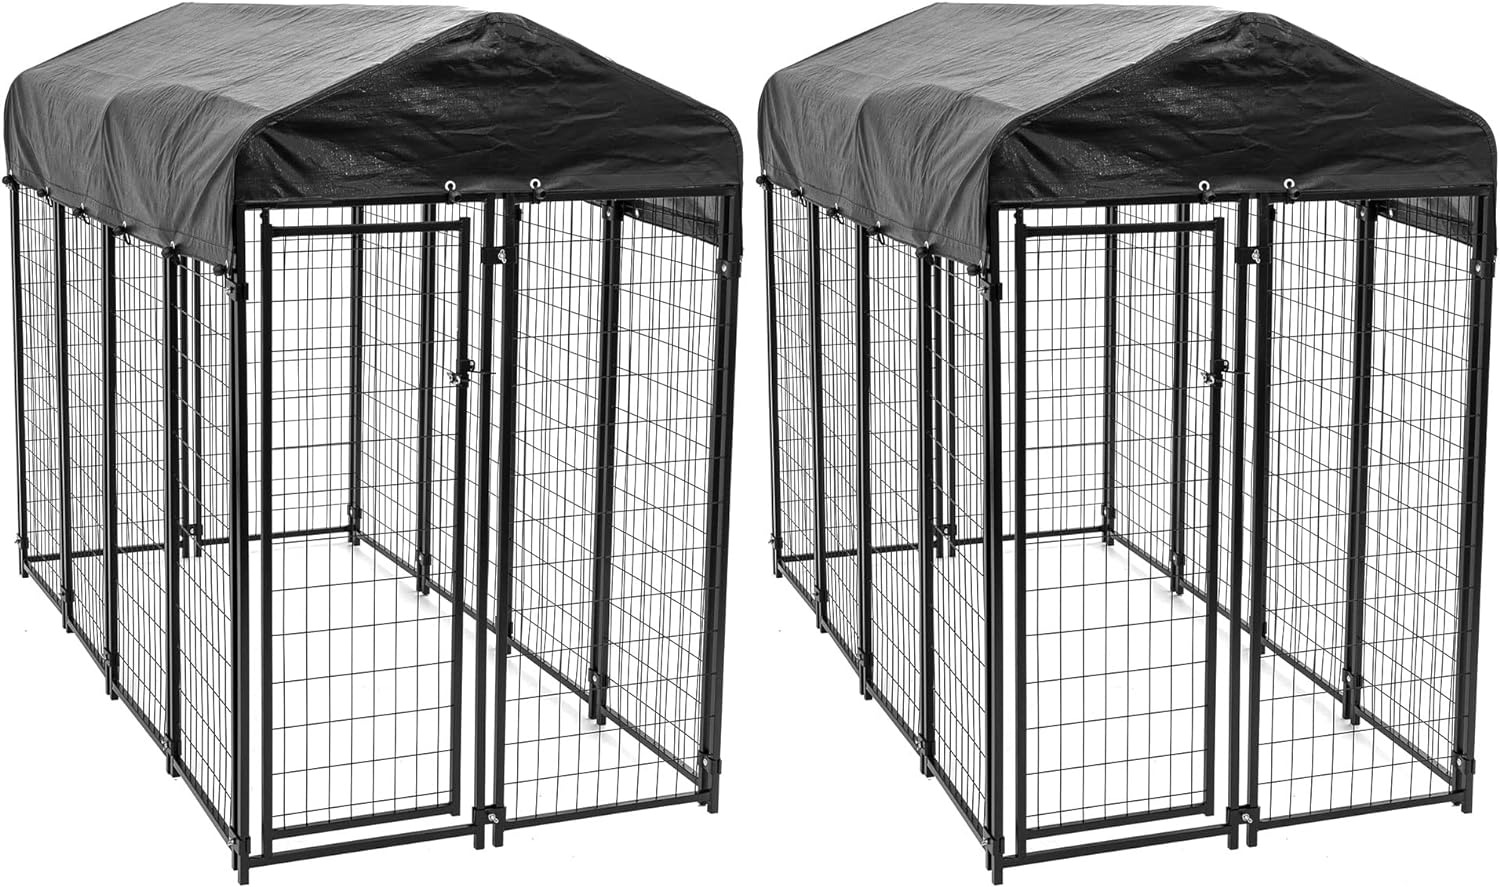 8Ft X 4Ft X 6Ft Large Outdoor Dog Kennel Playpen Crate with Heavy Duty Welded Wi